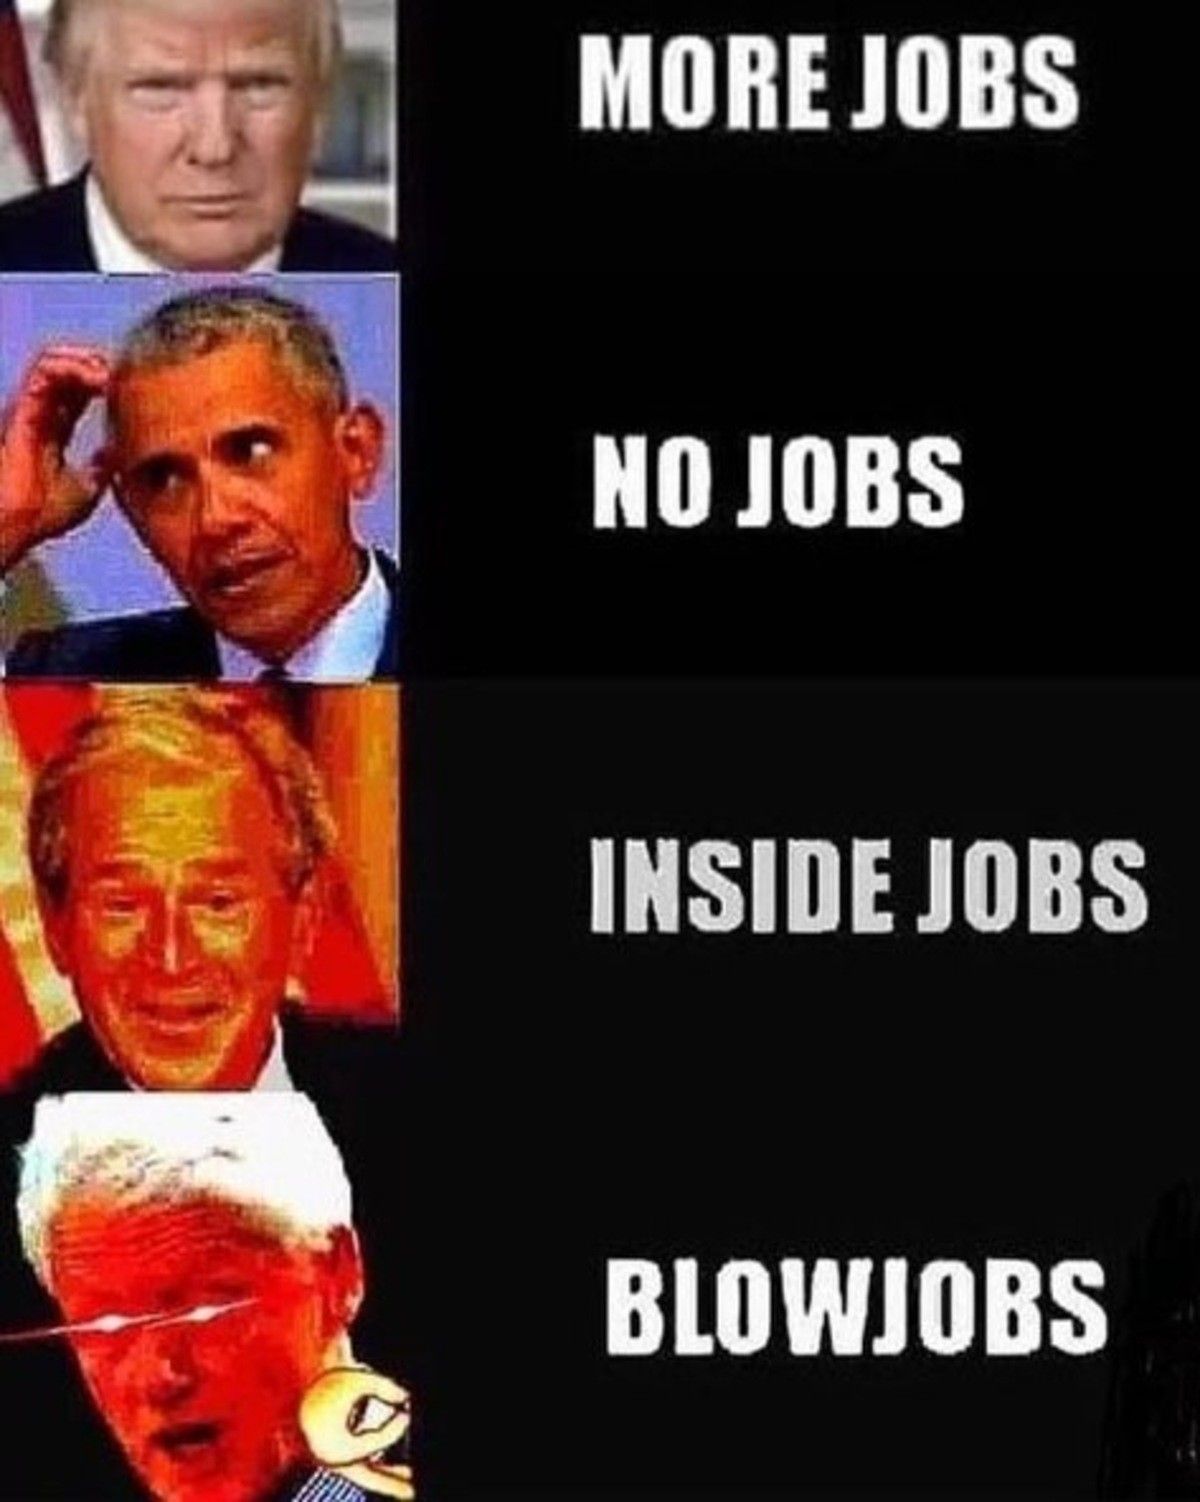 Every president has done a job